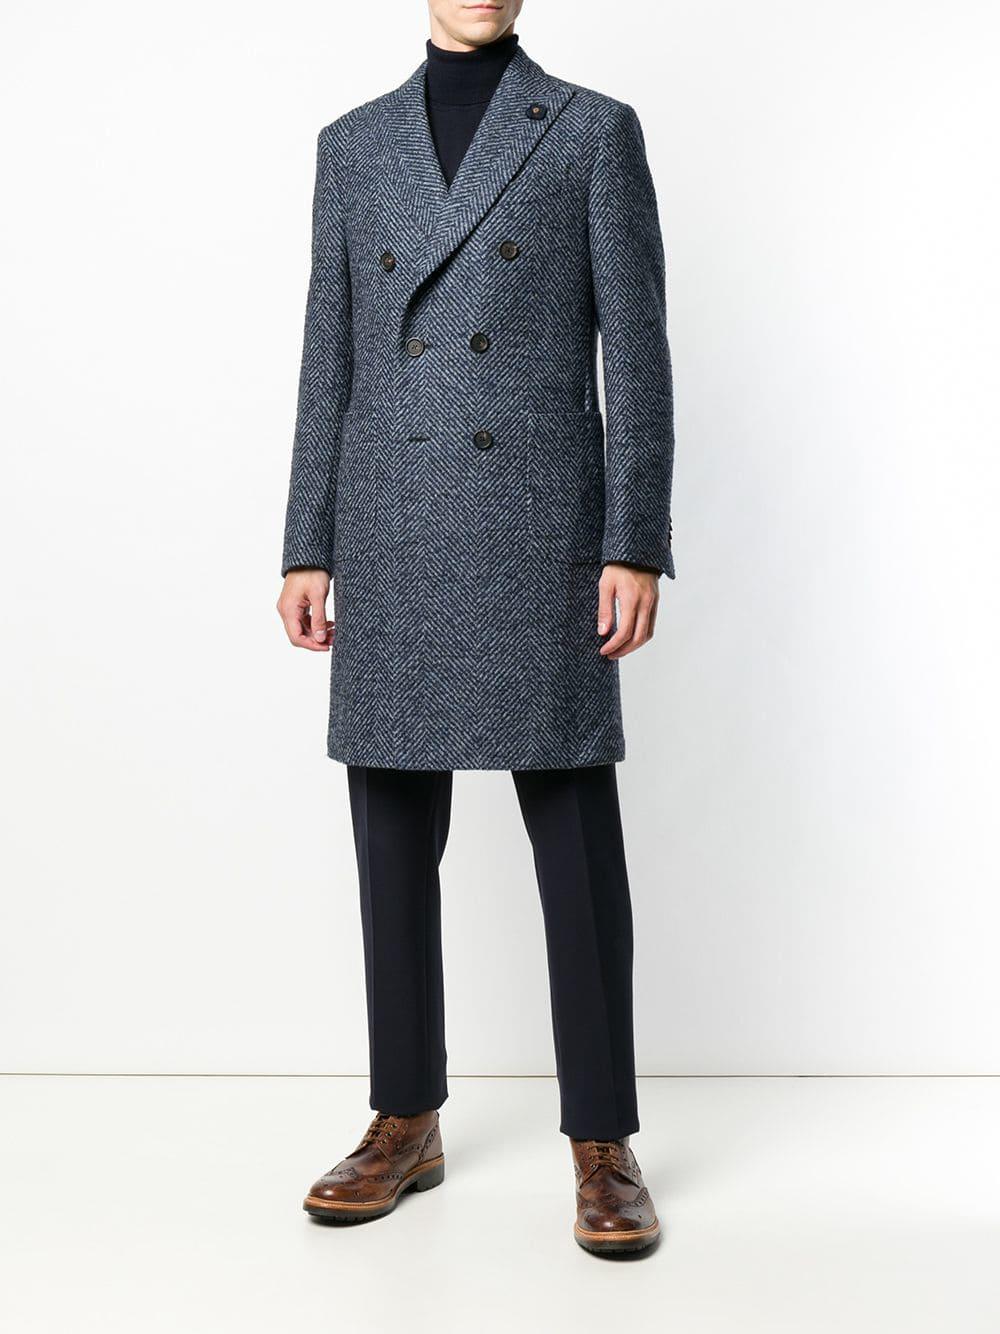 Lardini Synthetic Classic Double-breasted Coat in Blue for Men - Lyst